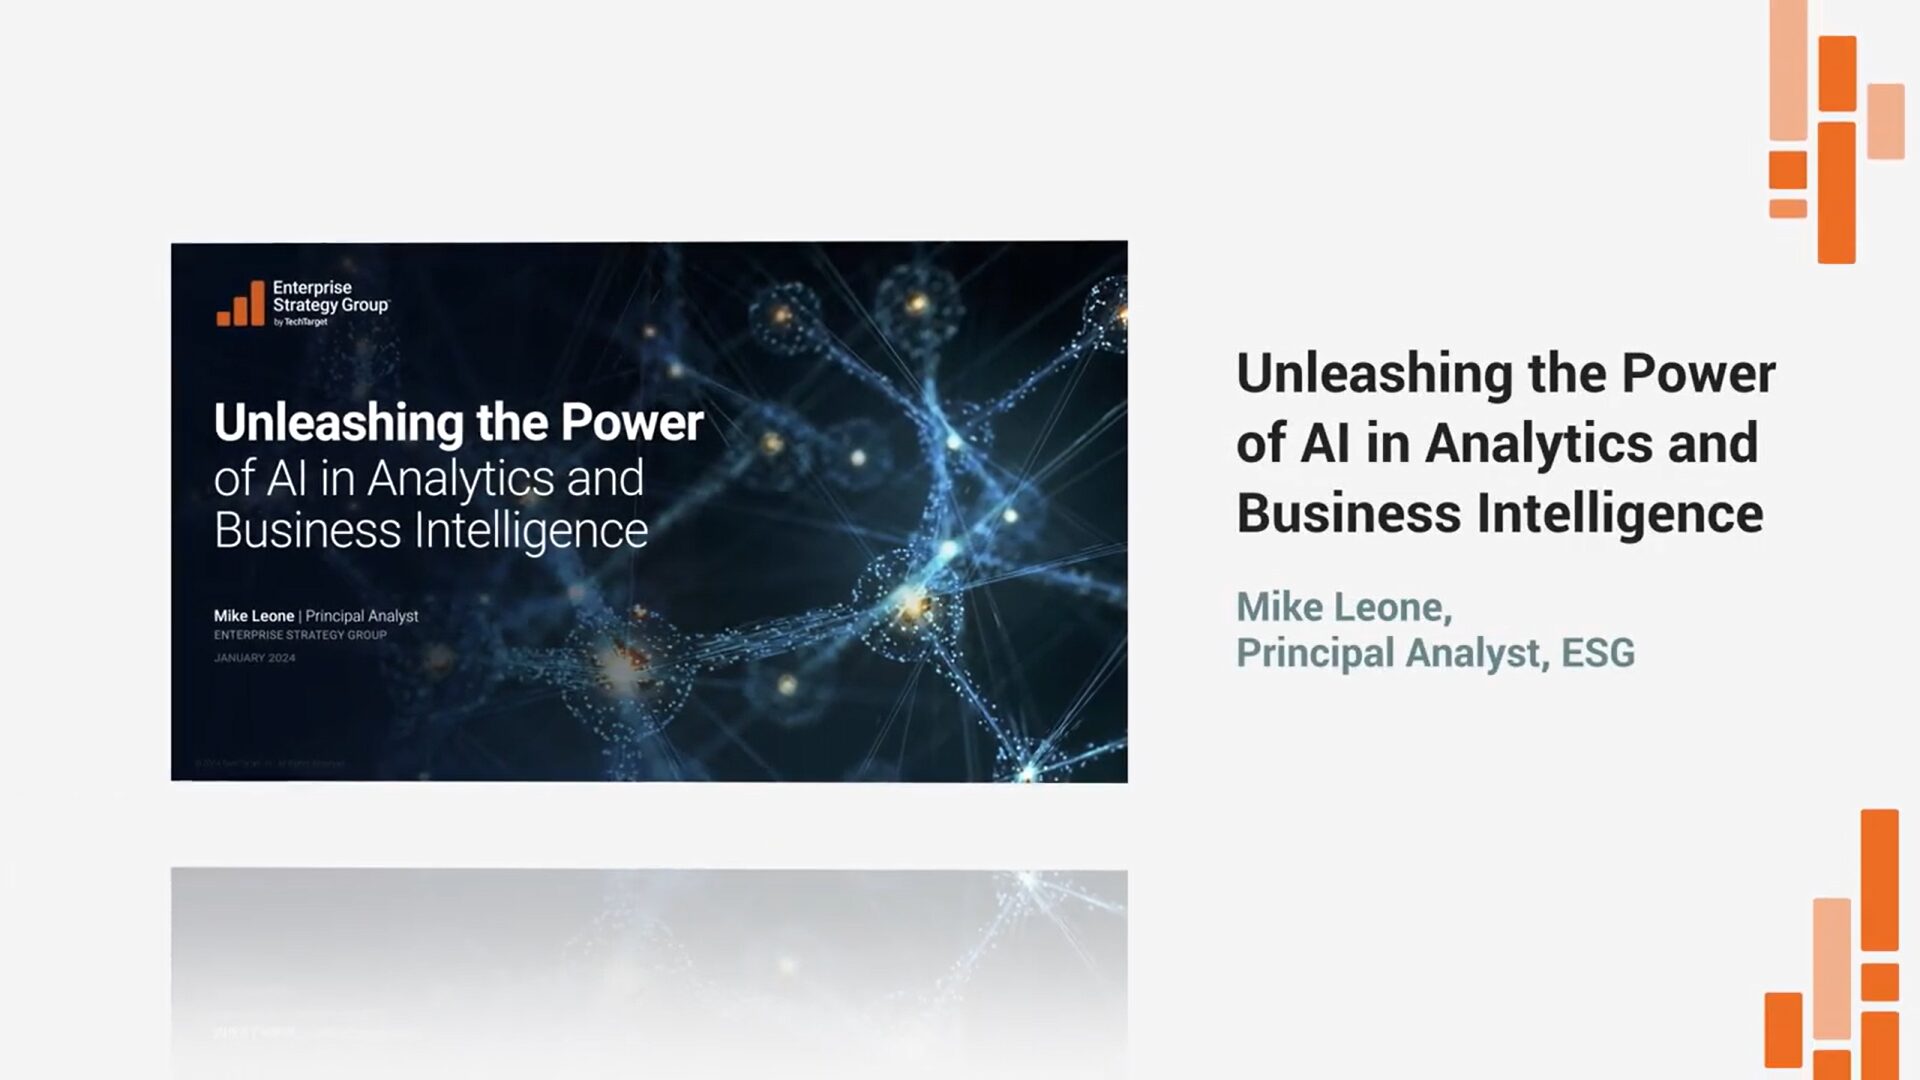 Unleashing the Power of AI in Analytics and Business Intelligence